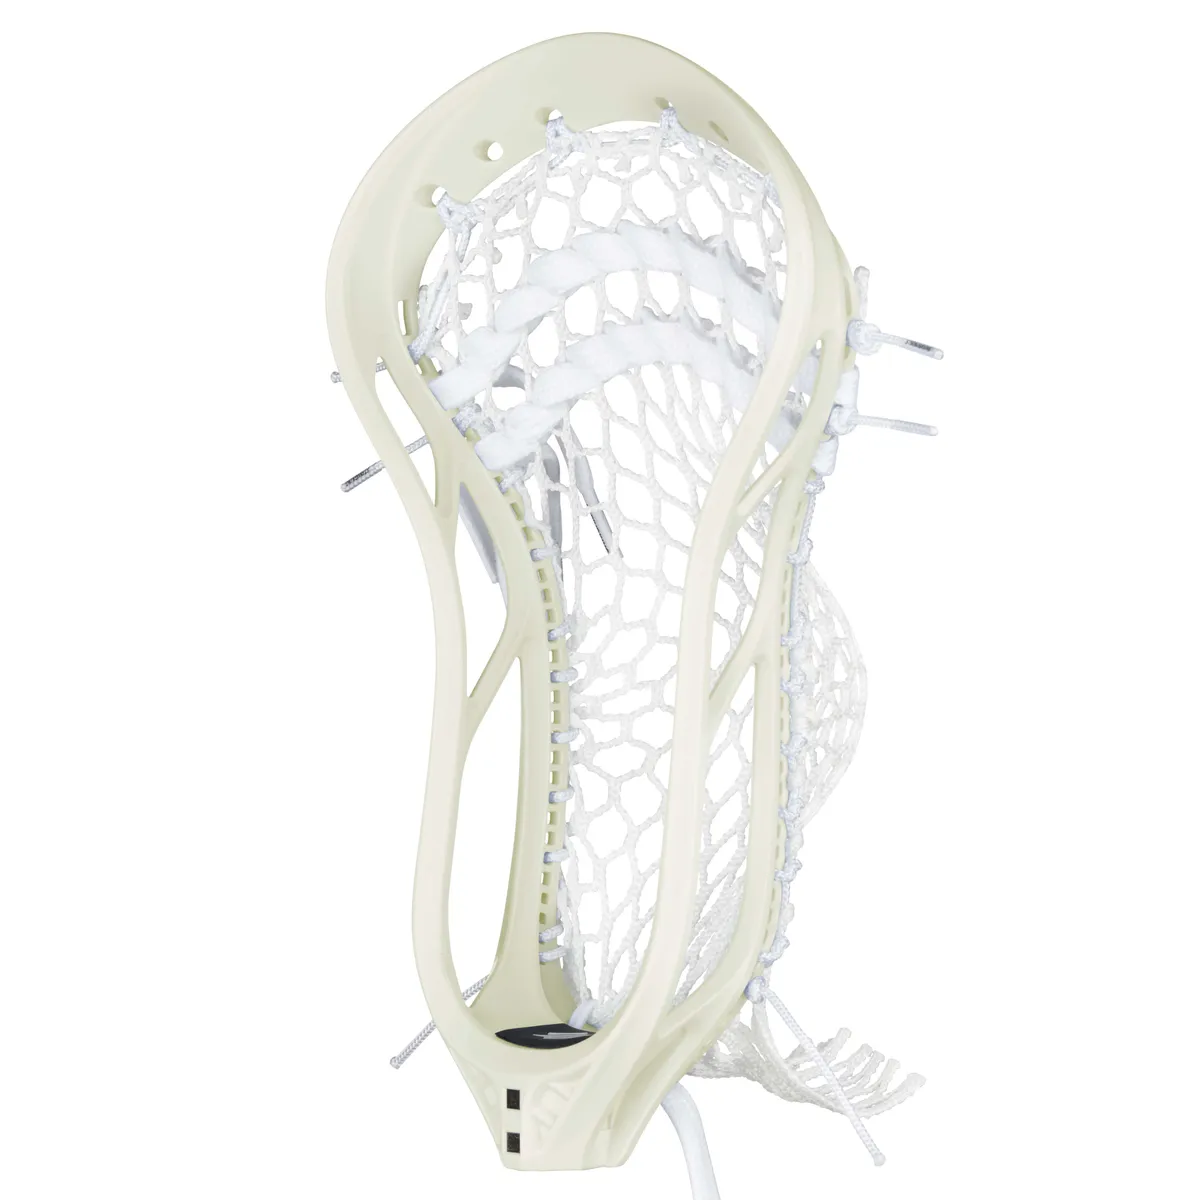 Faceoff Lacrosse Head Made to Win Faceoffs | Mark 2F | StringKing